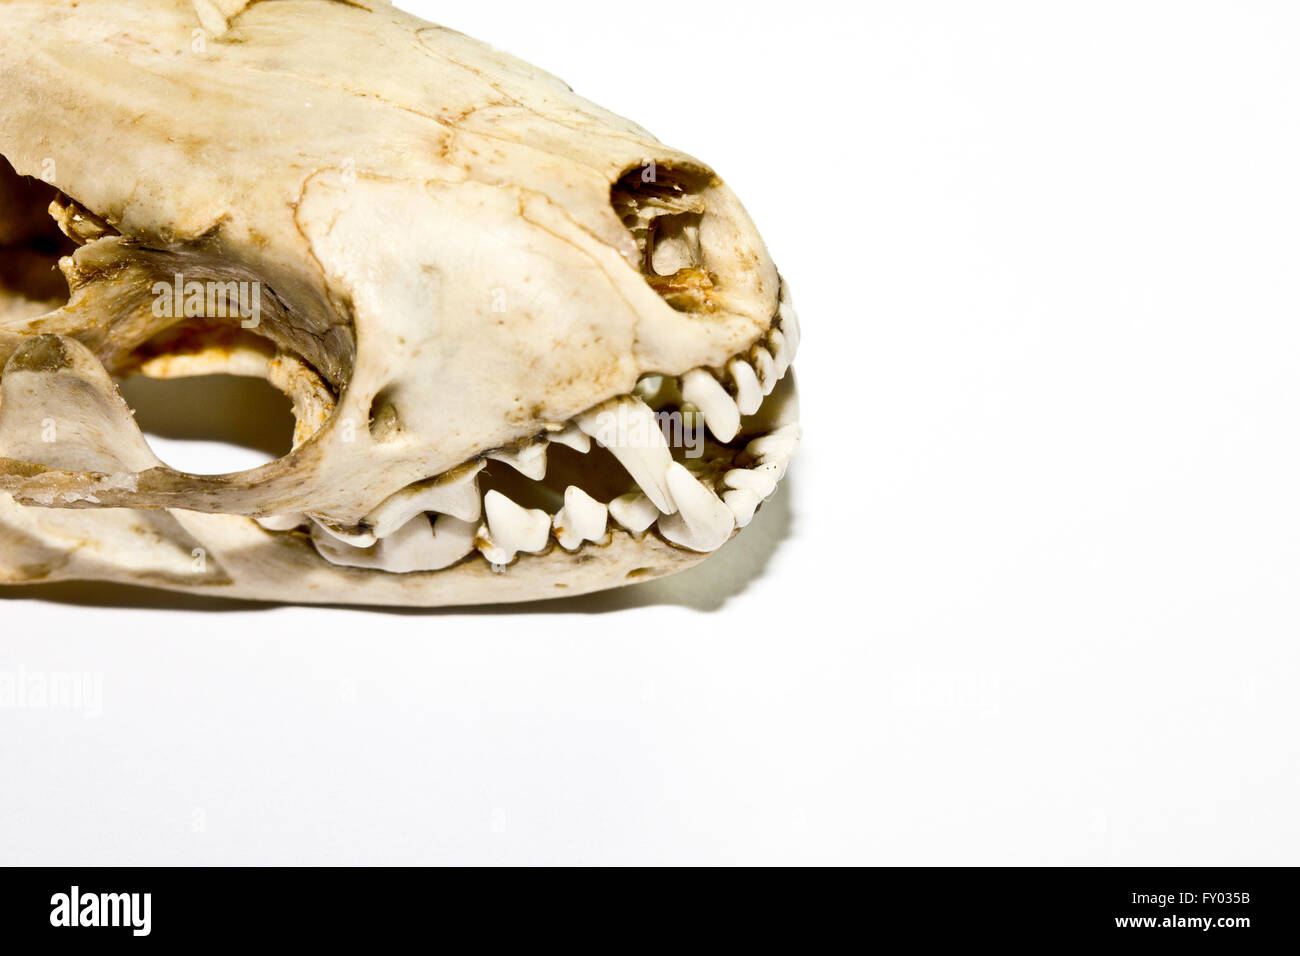 A stoat or weasel skull on white background Stock Photo